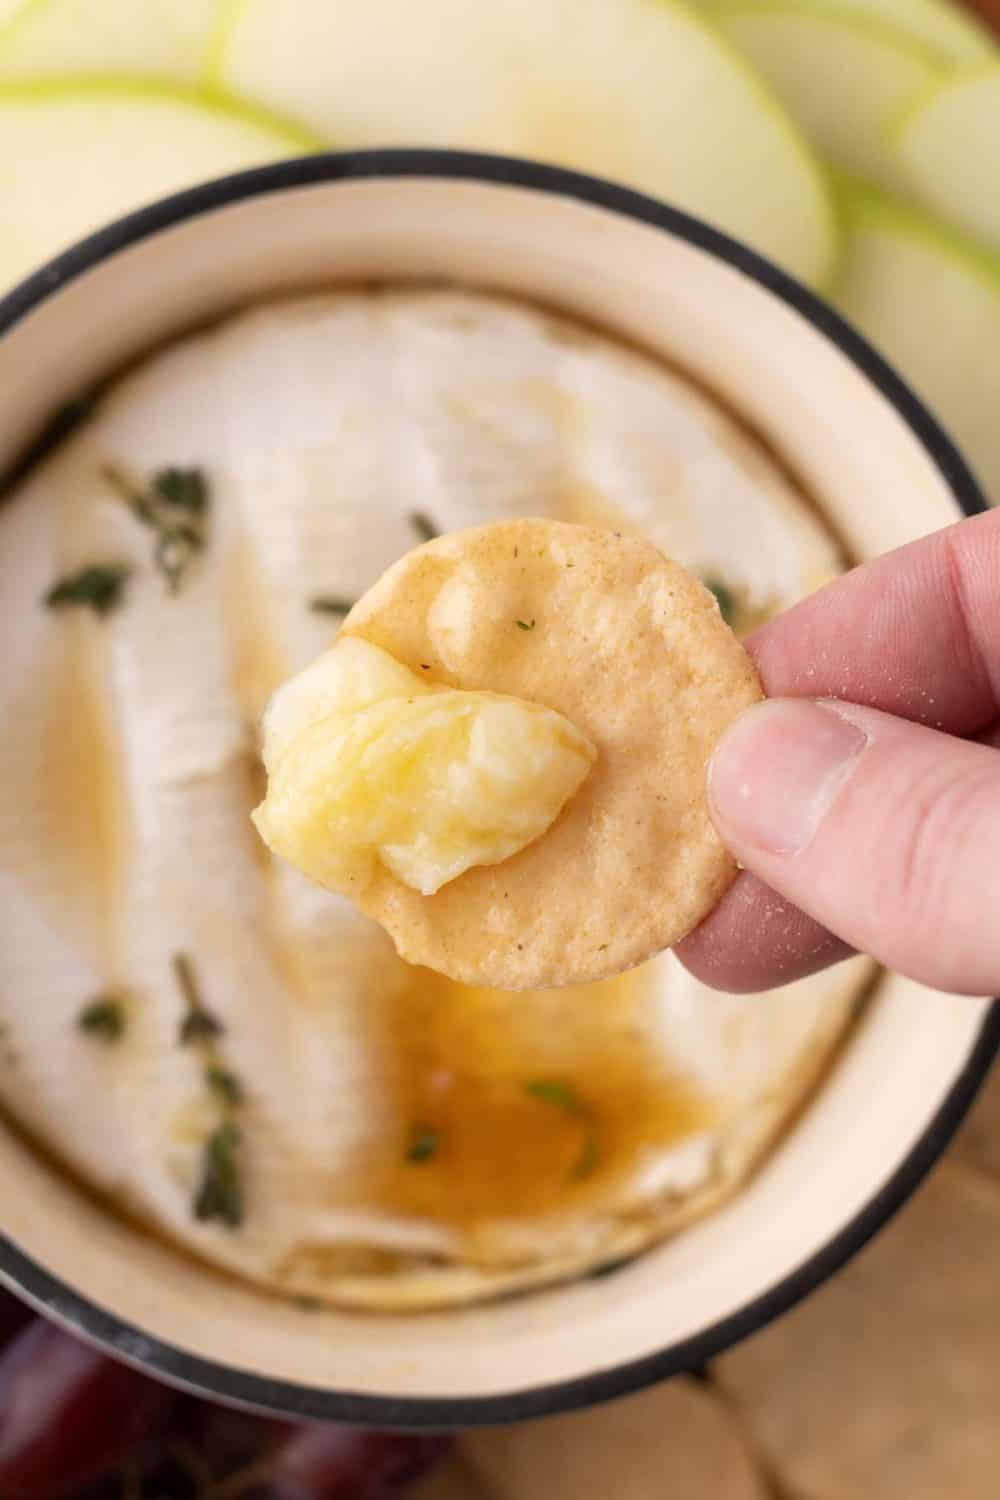 Baked brie scooped out of the round dish with a cracker ready to eat.